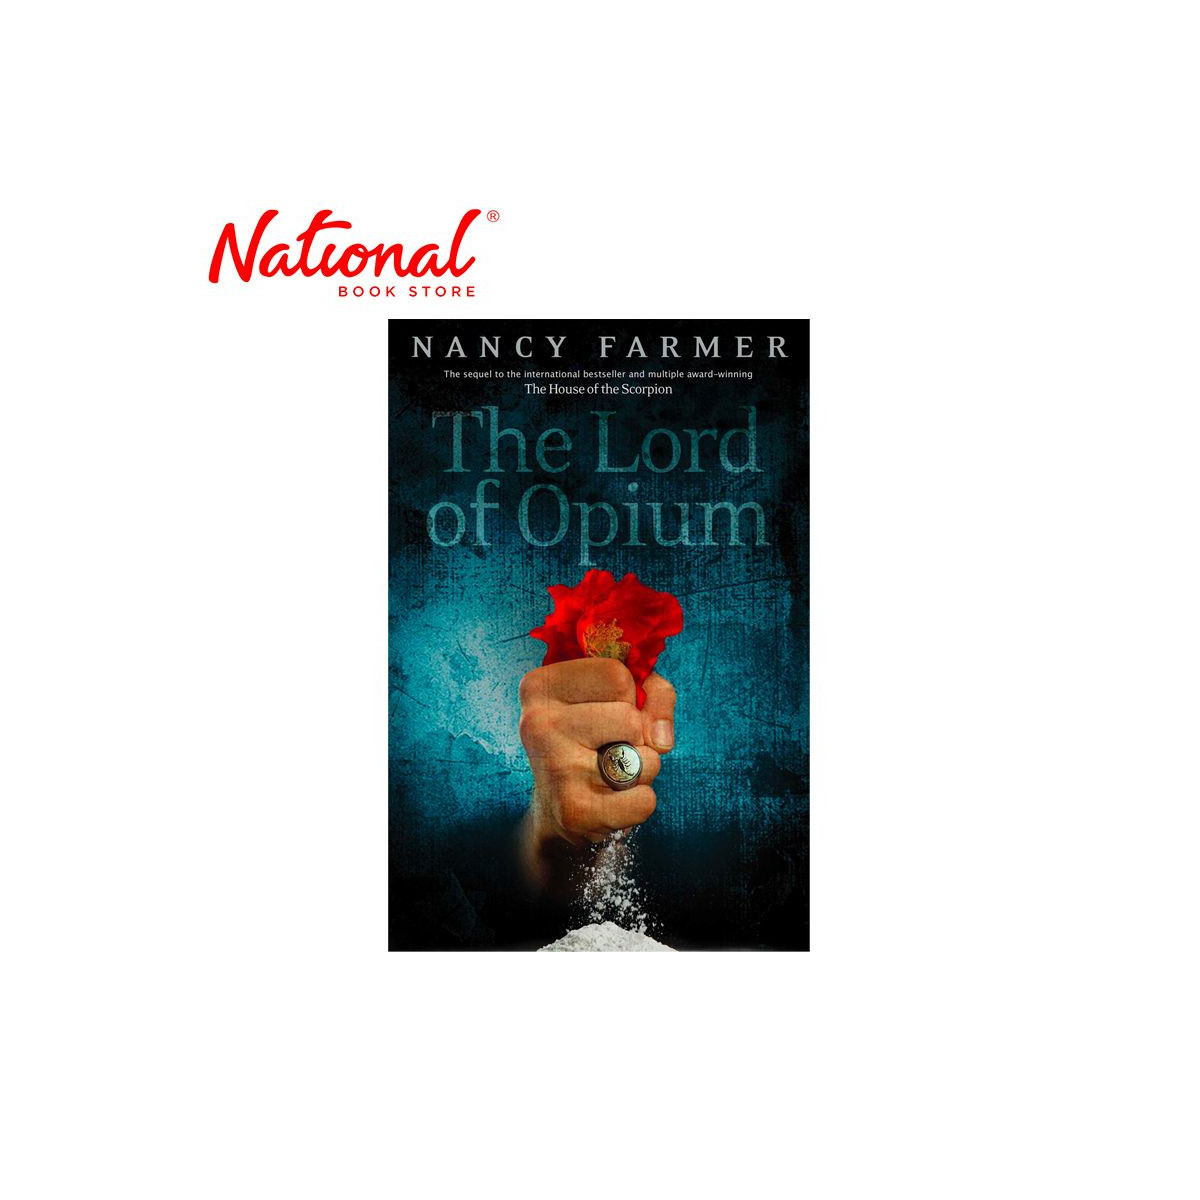 The Lord of Opium Trade Paperback by Nancy Farmer - Teens Fiction